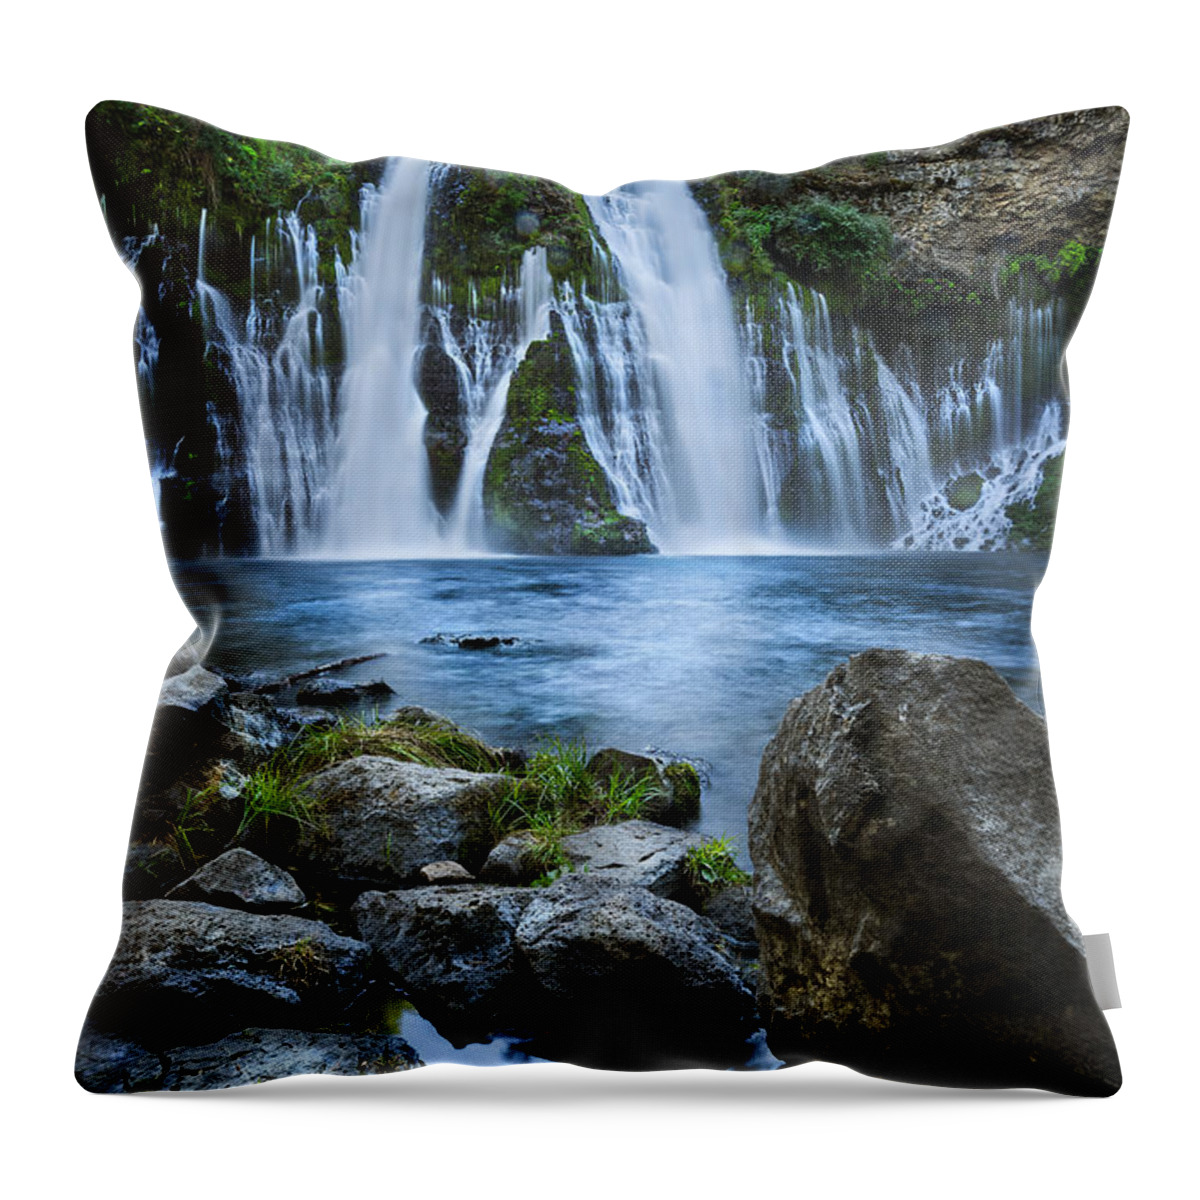 Burney Throw Pillow featuring the photograph Burney Falls California by Dianne Phelps